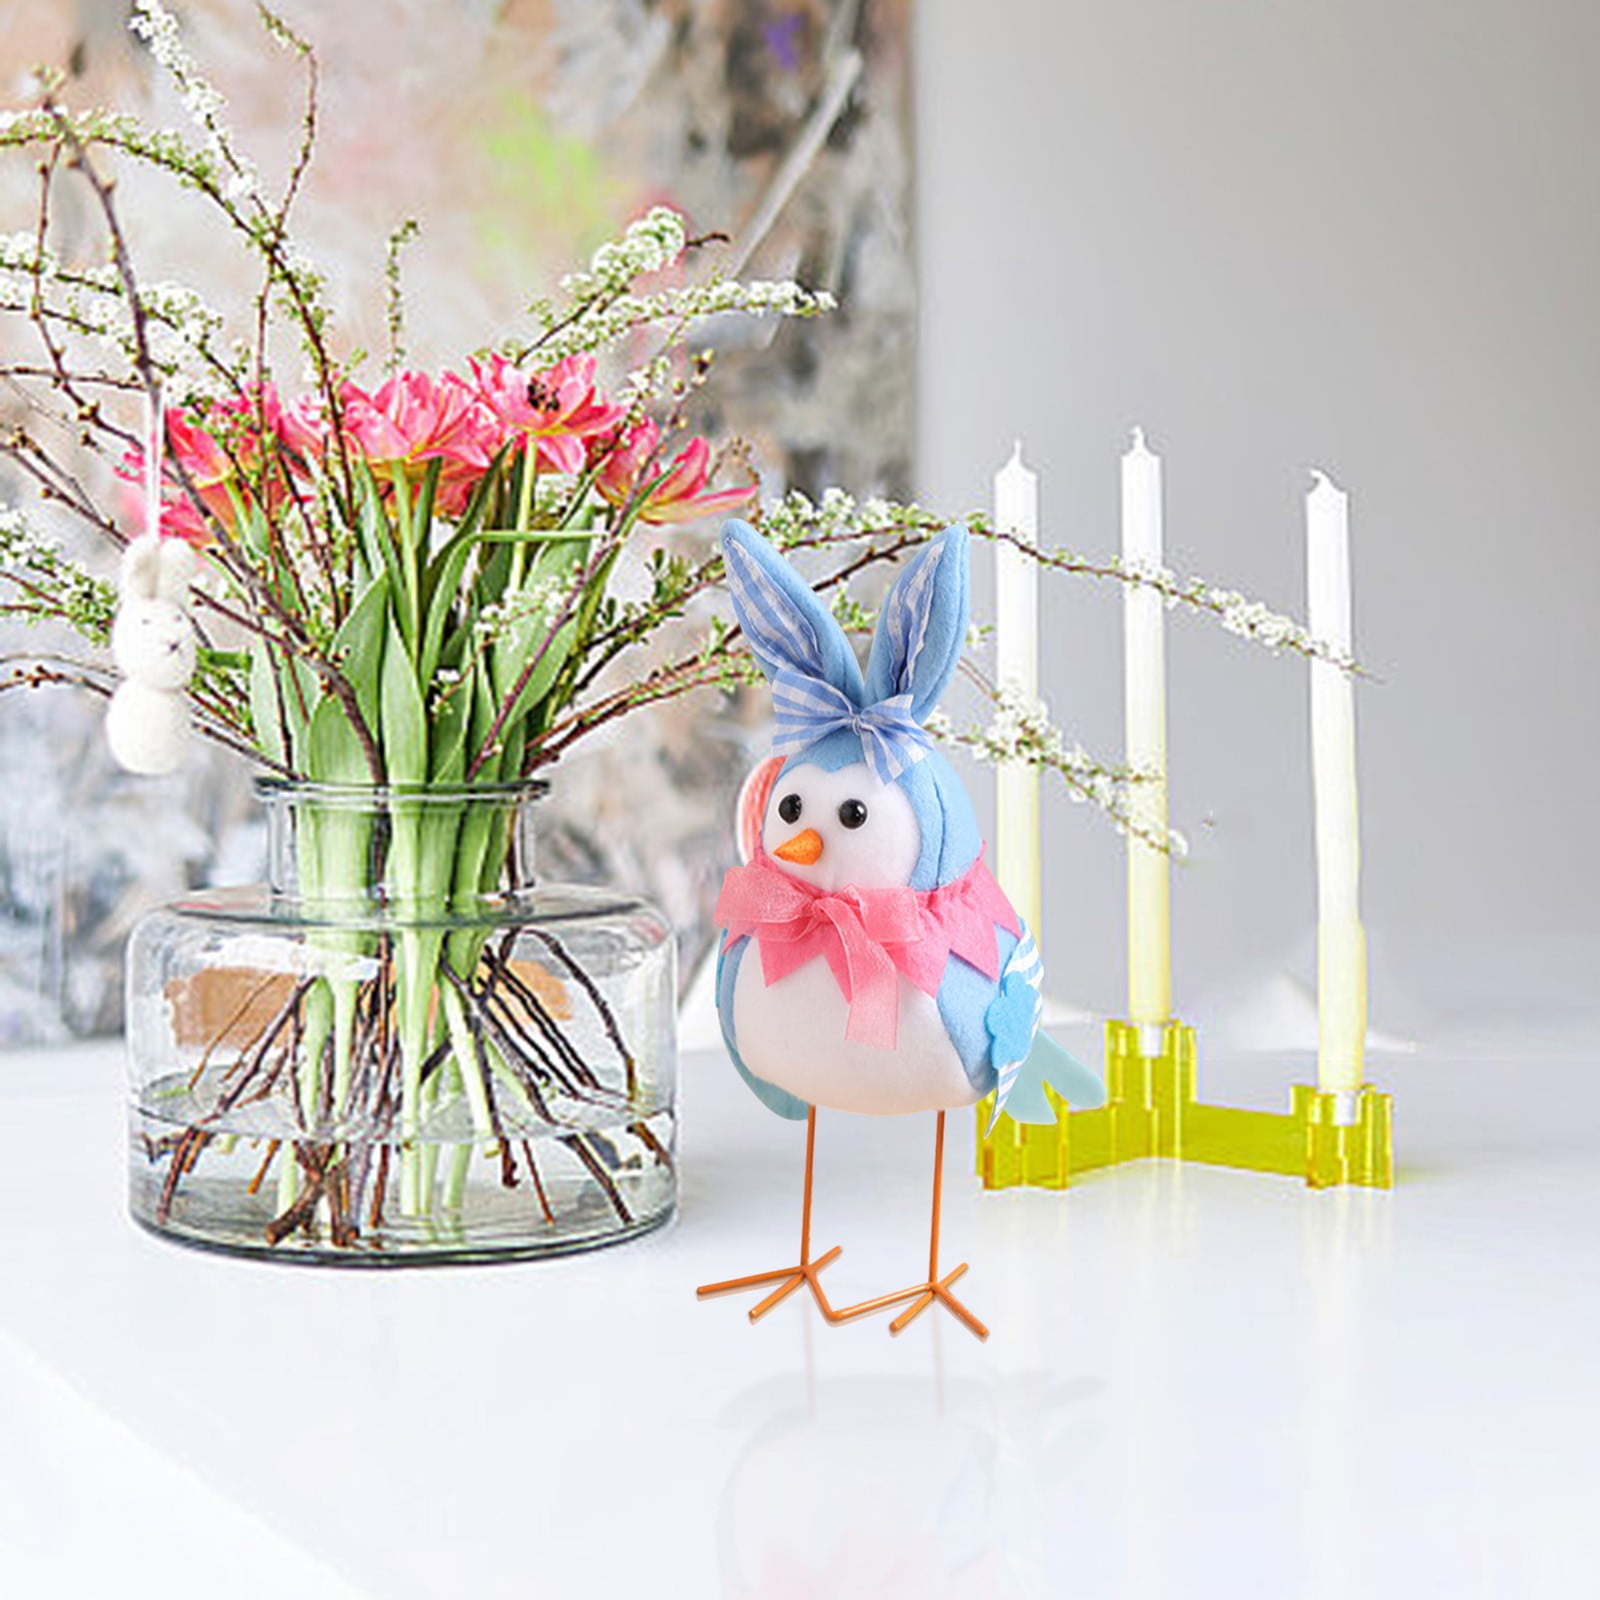 Easter Chick Decorations Spring Easter Chicken Decors Figurines with Bunny  Ears Tabletopper Decorations for Party Home Holiday Cute Egg Easter Day